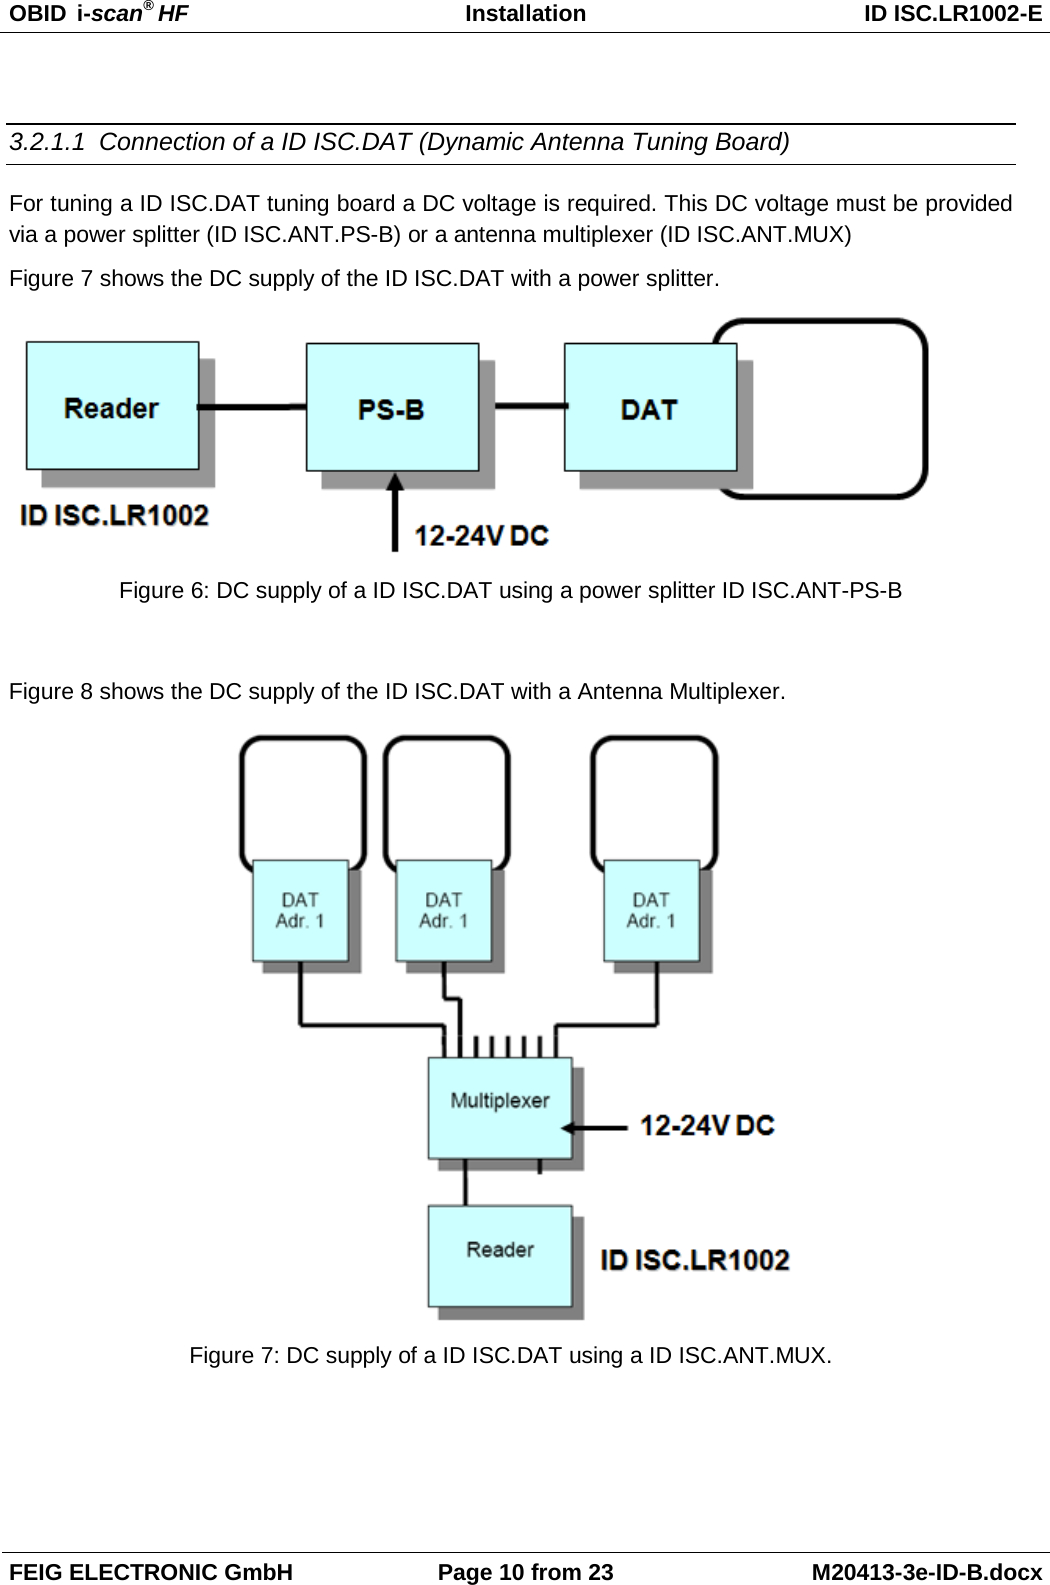 OBID  i-scan® HF Installation ID ISC.LR1002-E  FEIG ELECTRONIC GmbH Page 10 from 23 M20413-3e-ID-B.docx   3.2.1.1 Connection of a ID ISC.DAT (Dynamic Antenna Tuning Board) For tuning a ID ISC.DAT tuning board a DC voltage is required. This DC voltage must be provided via a power splitter (ID ISC.ANT.PS-B) or a antenna multiplexer (ID ISC.ANT.MUX) Figure 7 shows the DC supply of the ID ISC.DAT with a power splitter.  Figure 6: DC supply of a ID ISC.DAT using a power splitter ID ISC.ANT-PS-B  Figure 8 shows the DC supply of the ID ISC.DAT with a Antenna Multiplexer.  Figure 7: DC supply of a ID ISC.DAT using a ID ISC.ANT.MUX.  